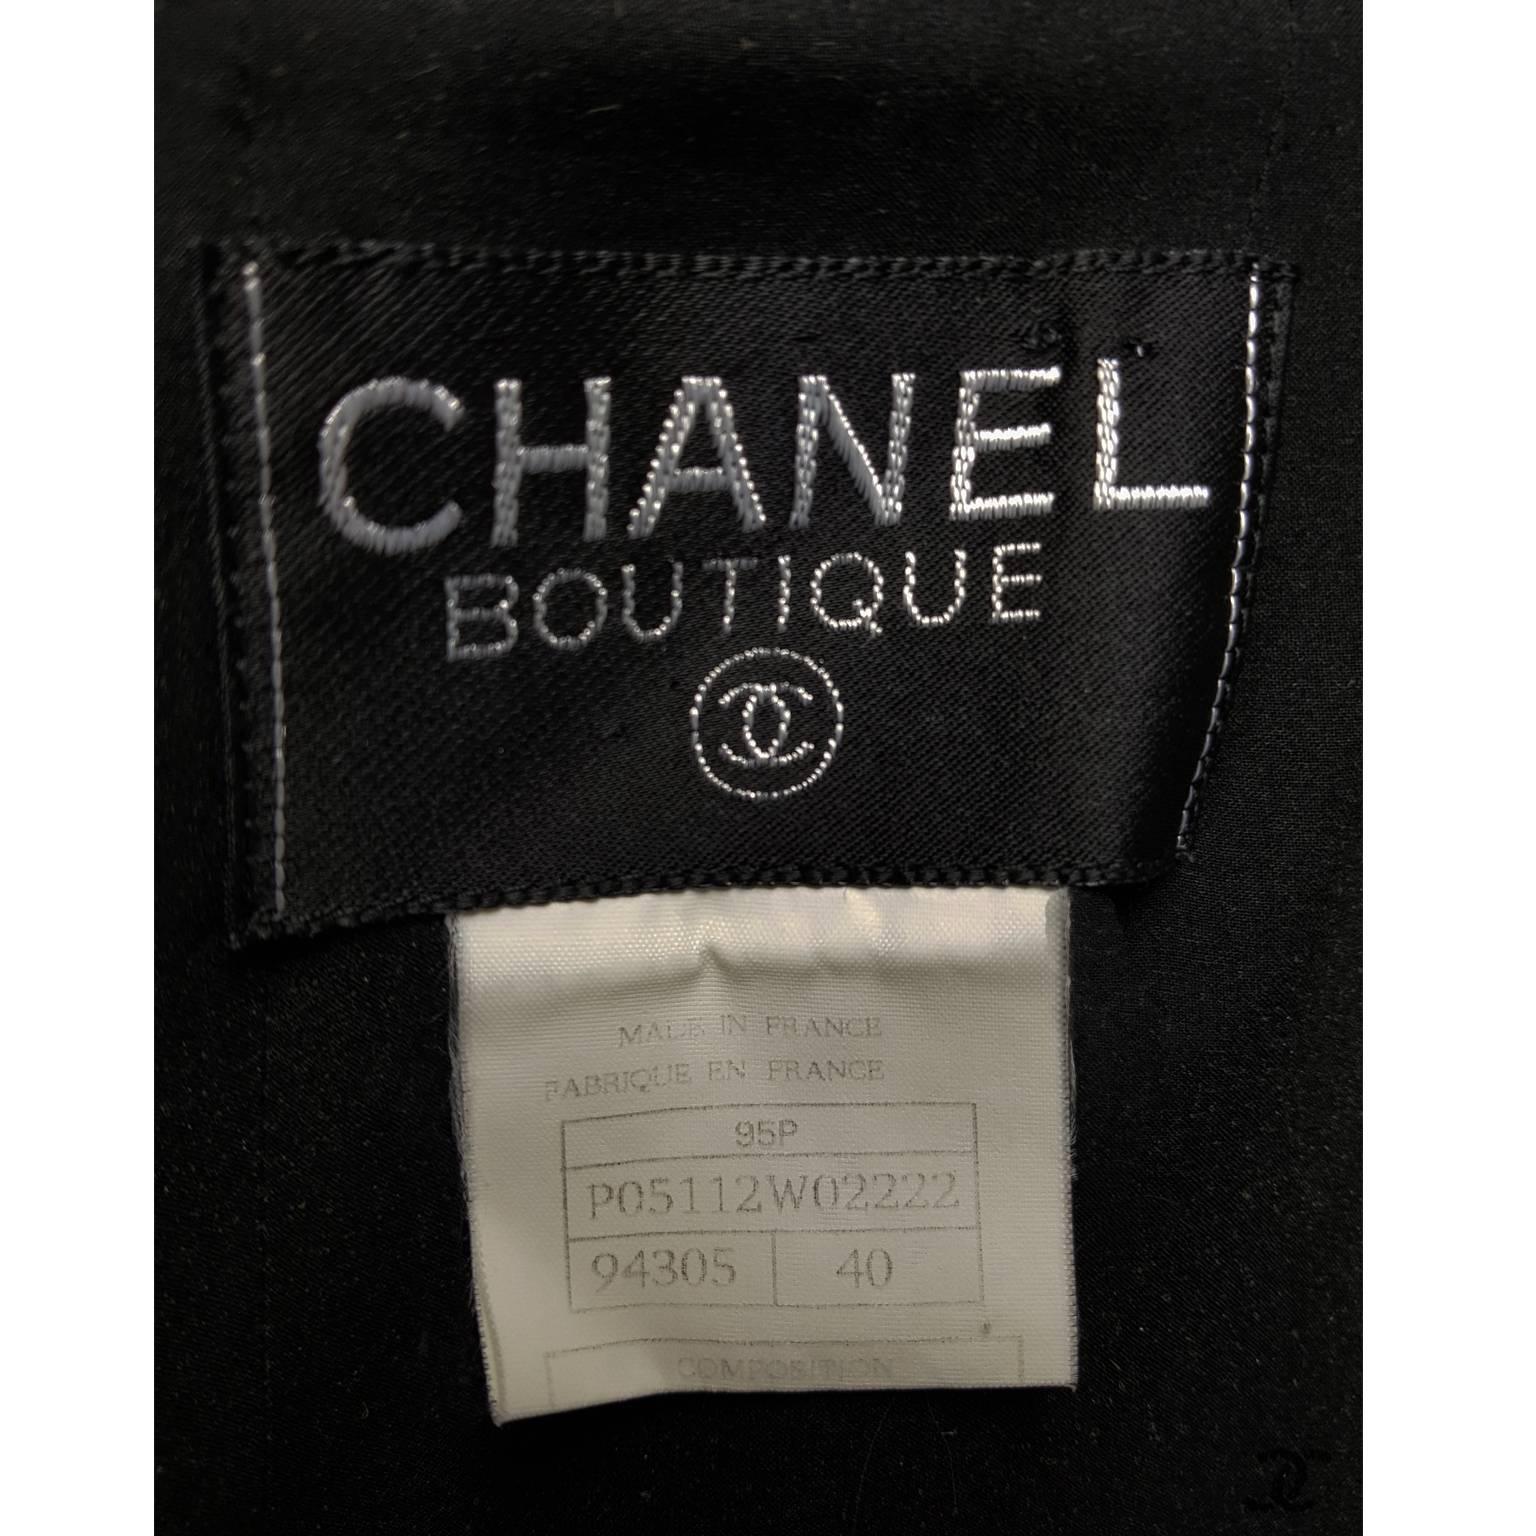 Chanel Black Jumpsuit with Jacket, S / S 1995 For Sale 2